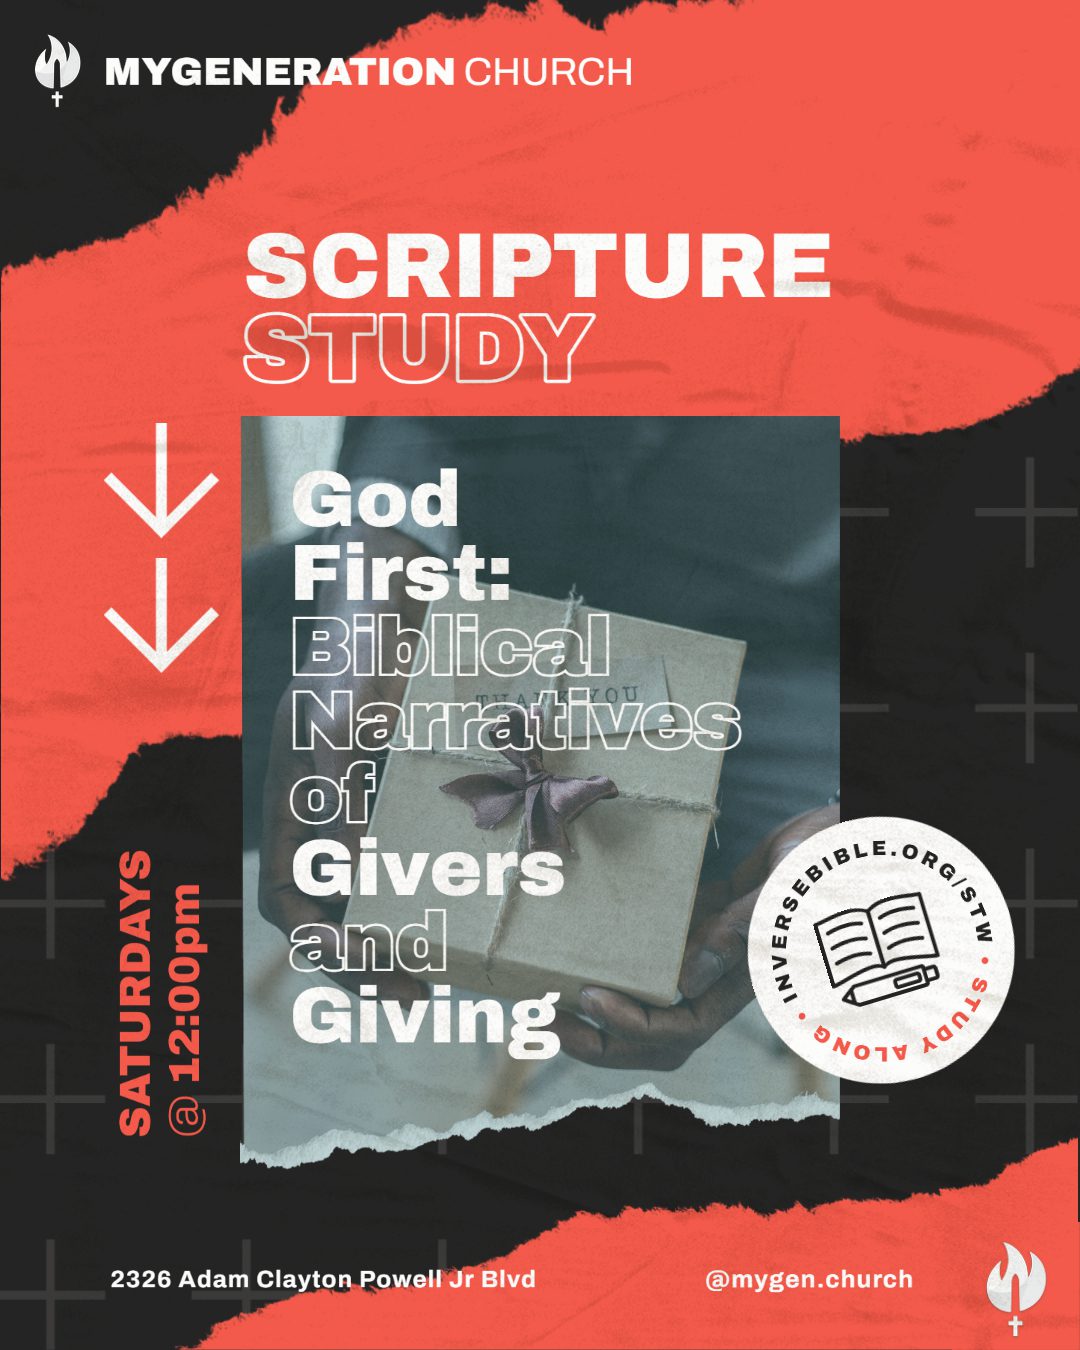 Scripture Study - God First: Biblical Narratives of Givers and Giving